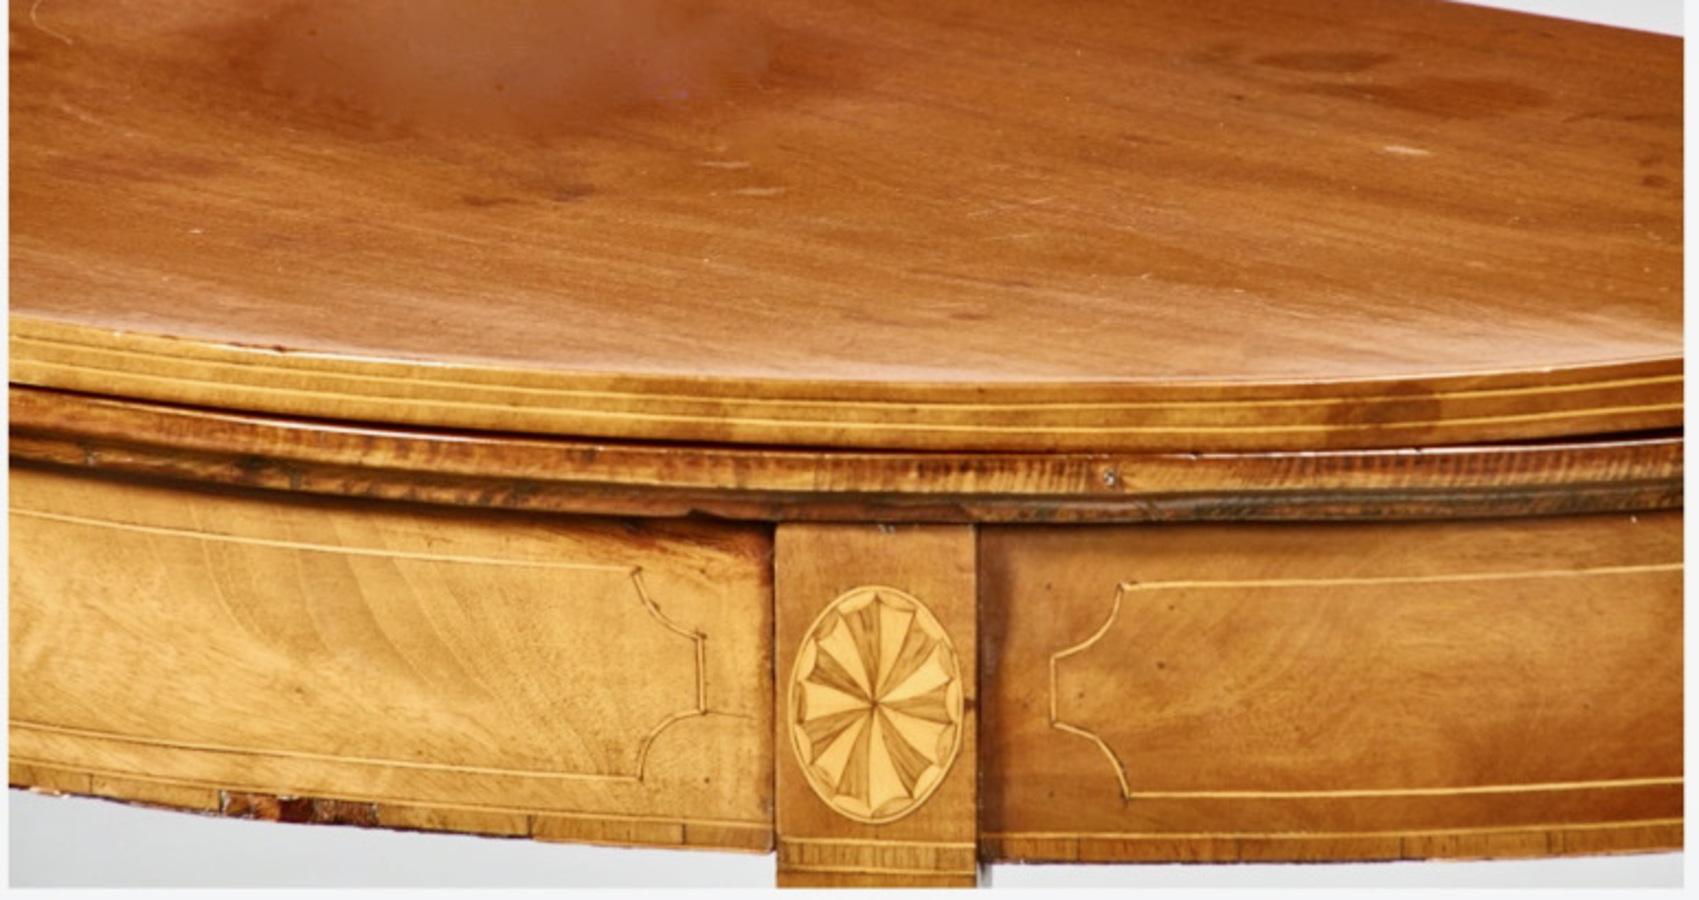 This is a good example of a George III, late 18th century mahogany fold-over demi-lune games table. The table features satinwood line inlay, a solid mahogany fold-over top, inlaid paterae at all four legs with line inlay to the skirt and legs. The